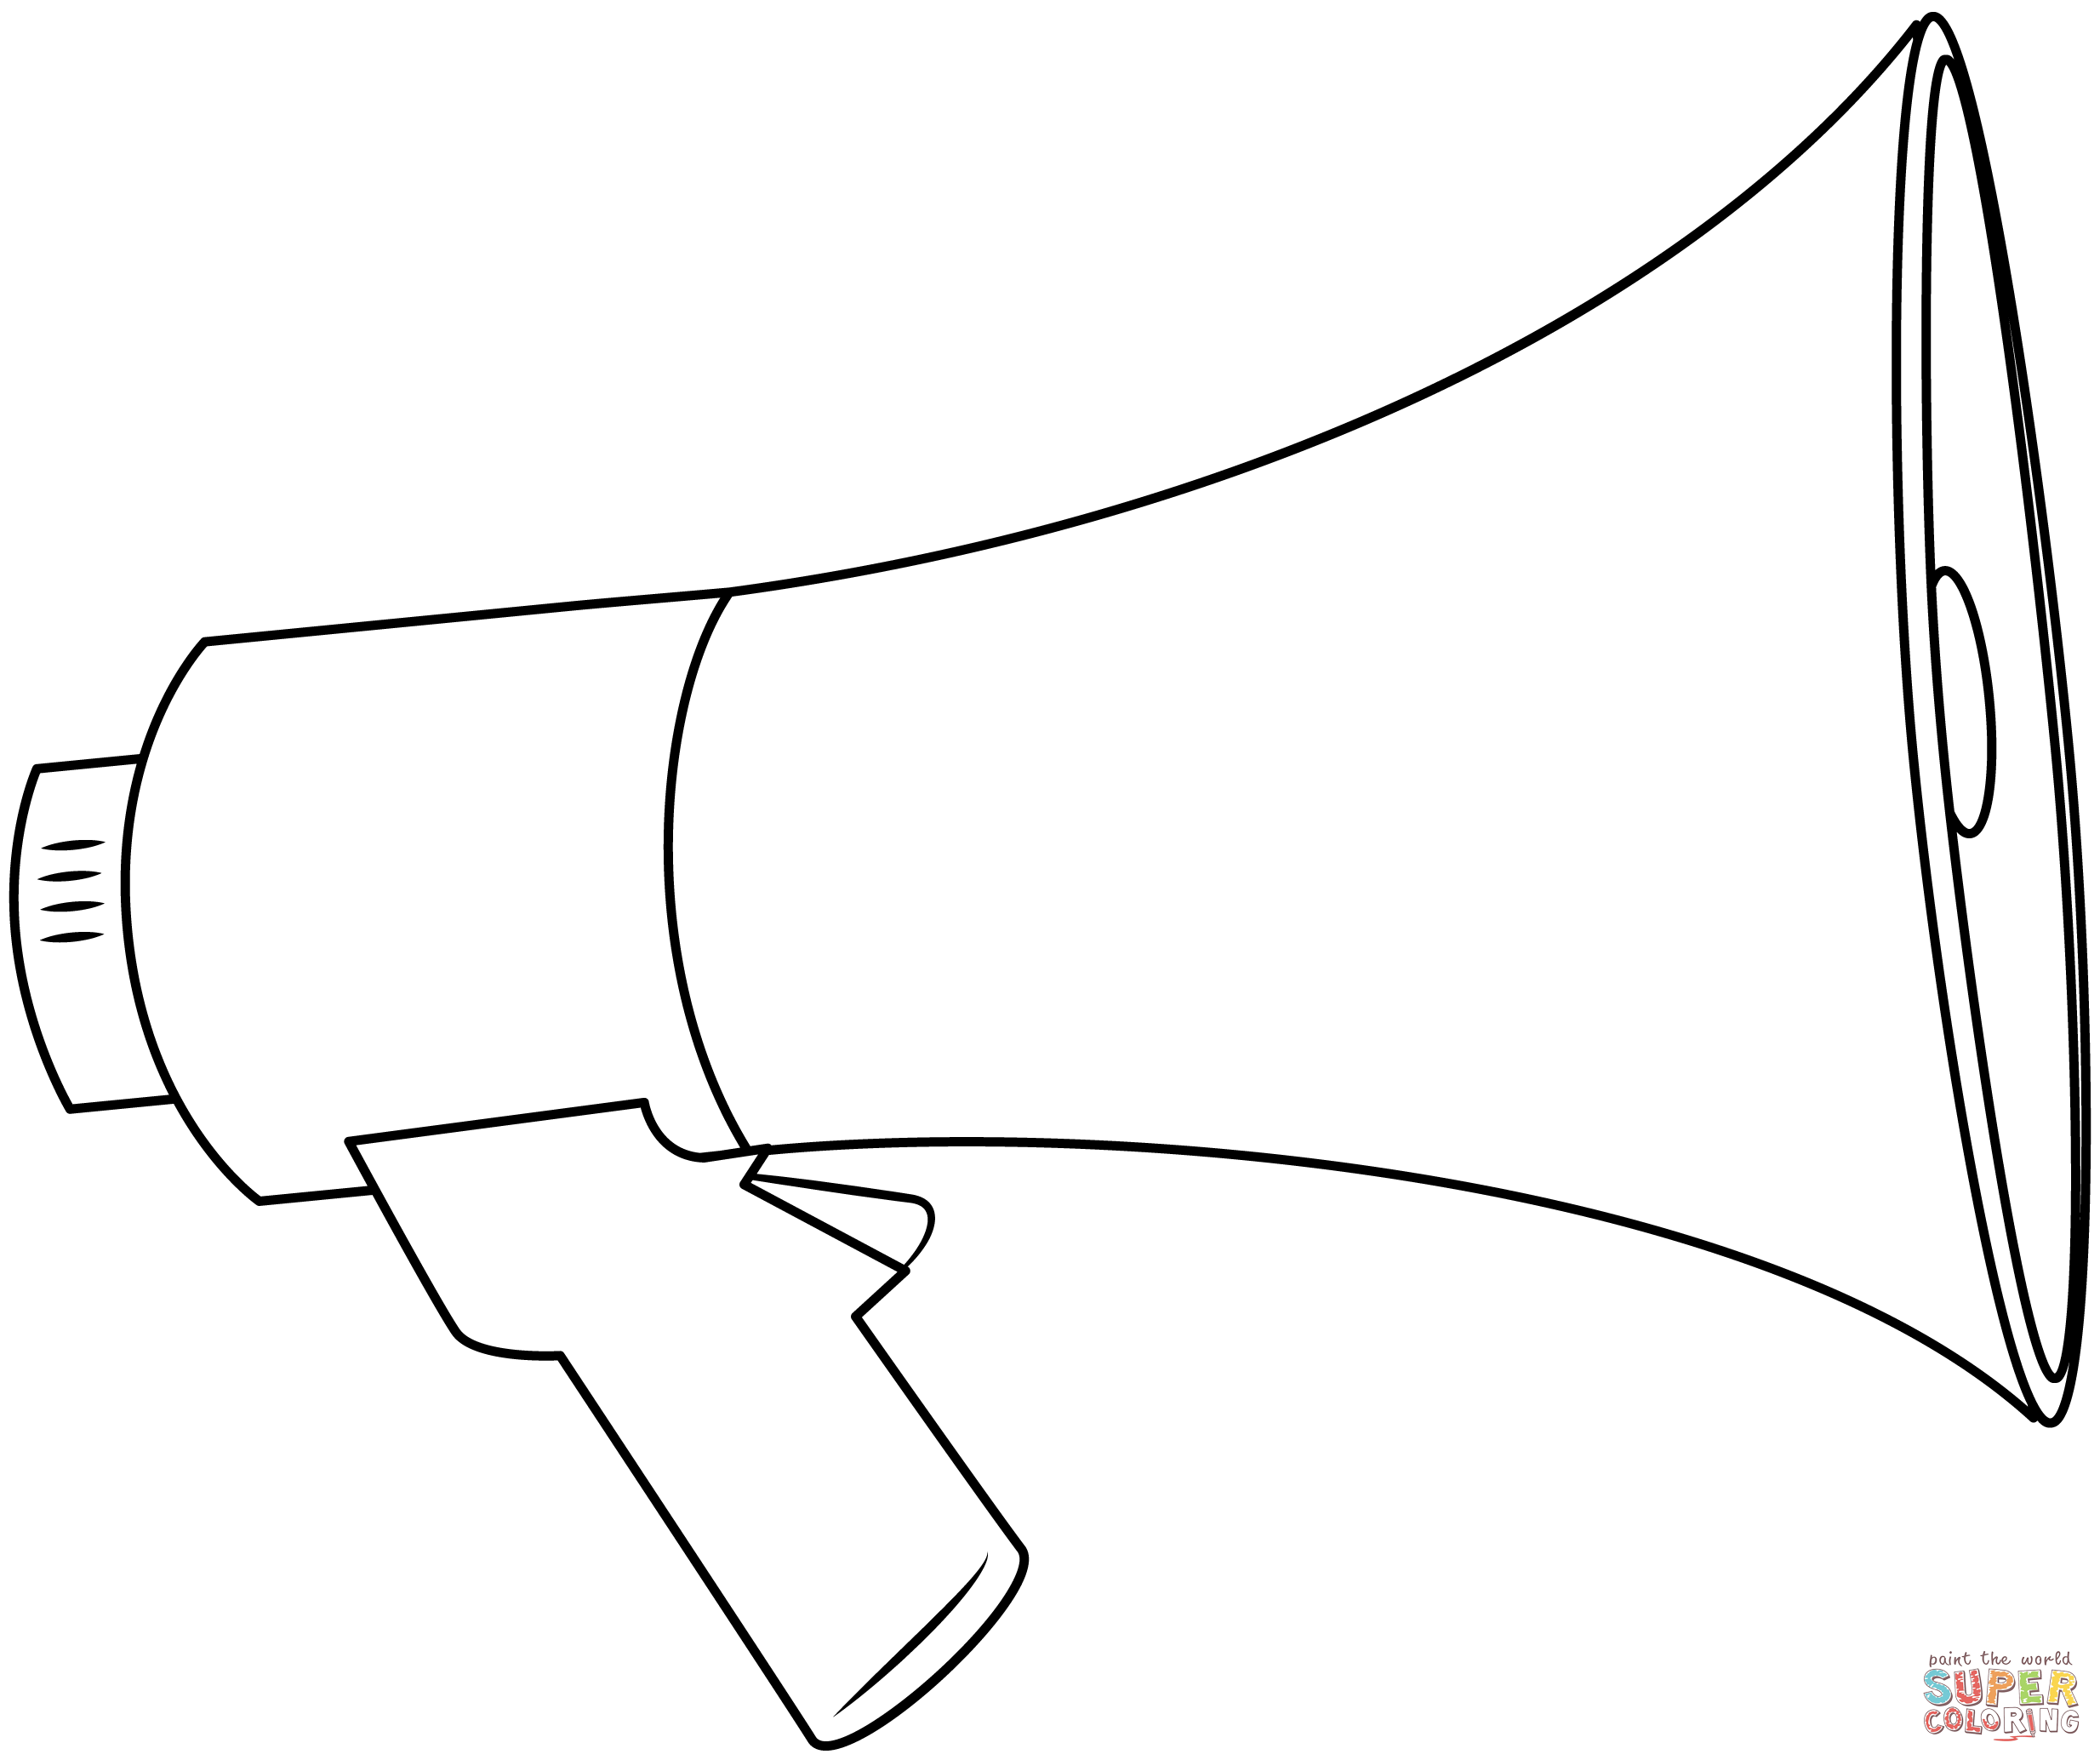 Megaphone coloring page | Free Printable Coloring Pages